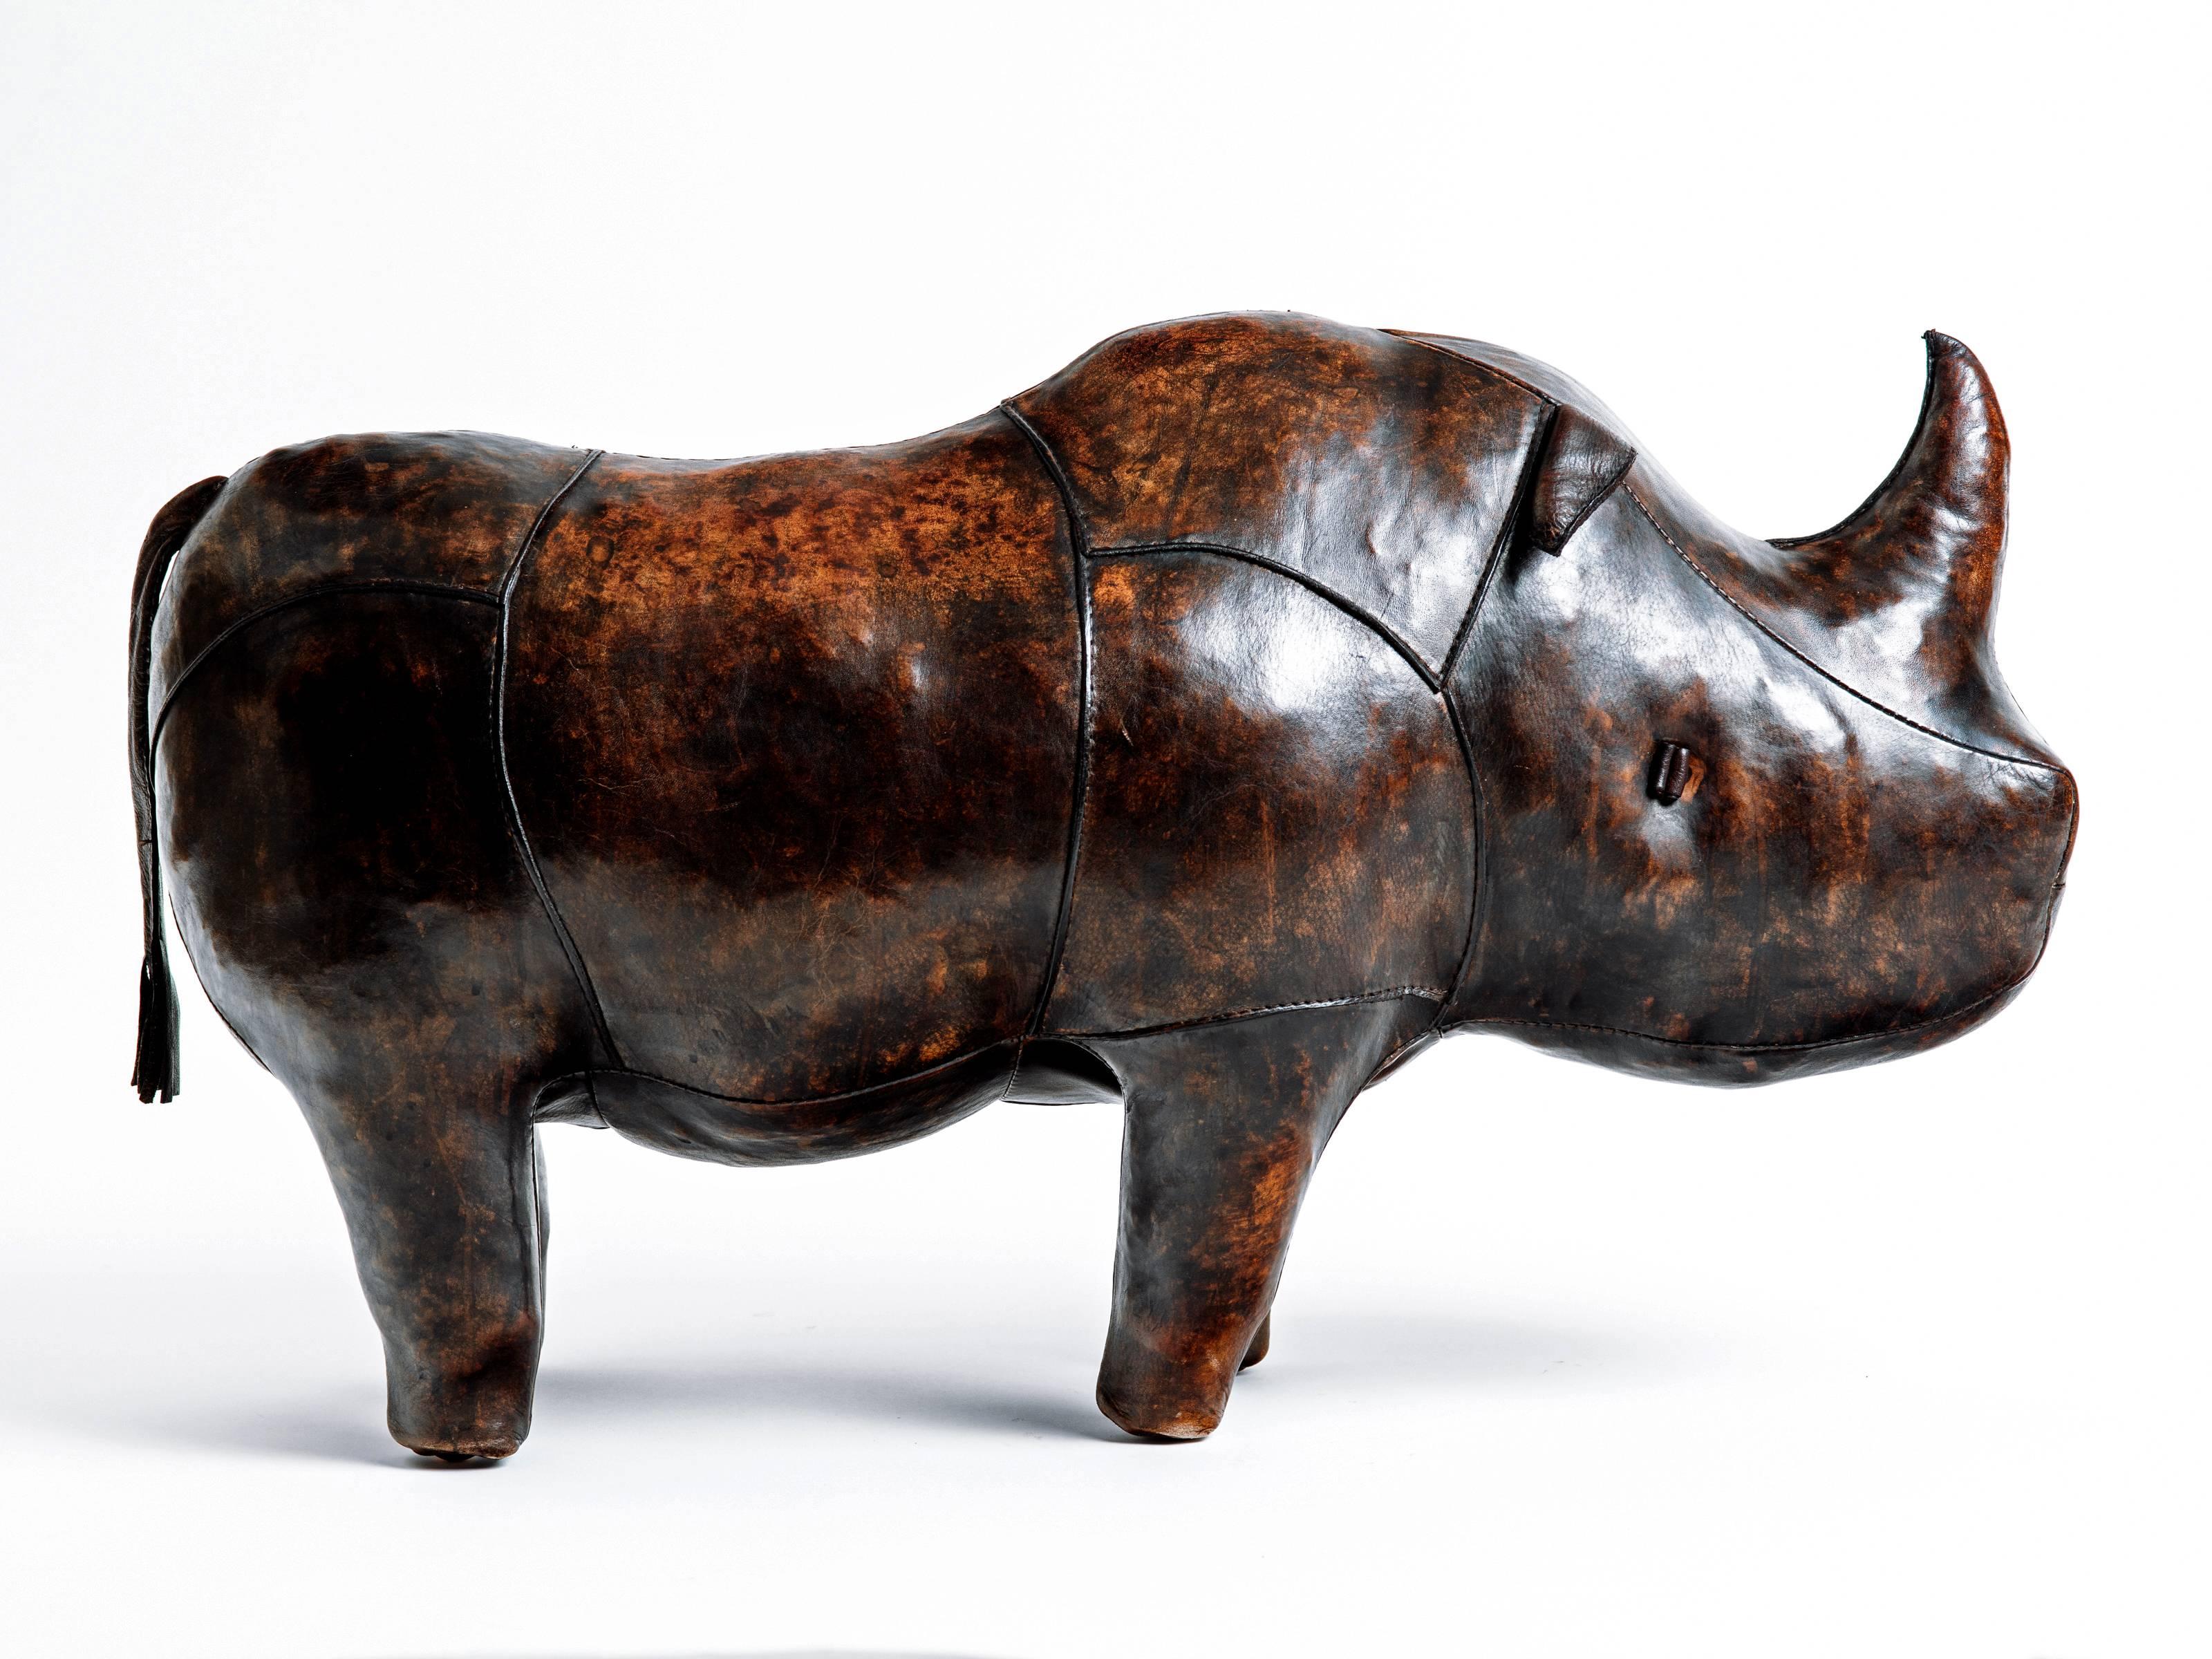 Great vintage Abercrombie and Fitch Leather Rhino footstool.  Since the 1960s, Abercrombie and Fitch commissioned a series of leather rhinos to use as display pieces in their American stores. As collector’s items, this guy has great patina and is